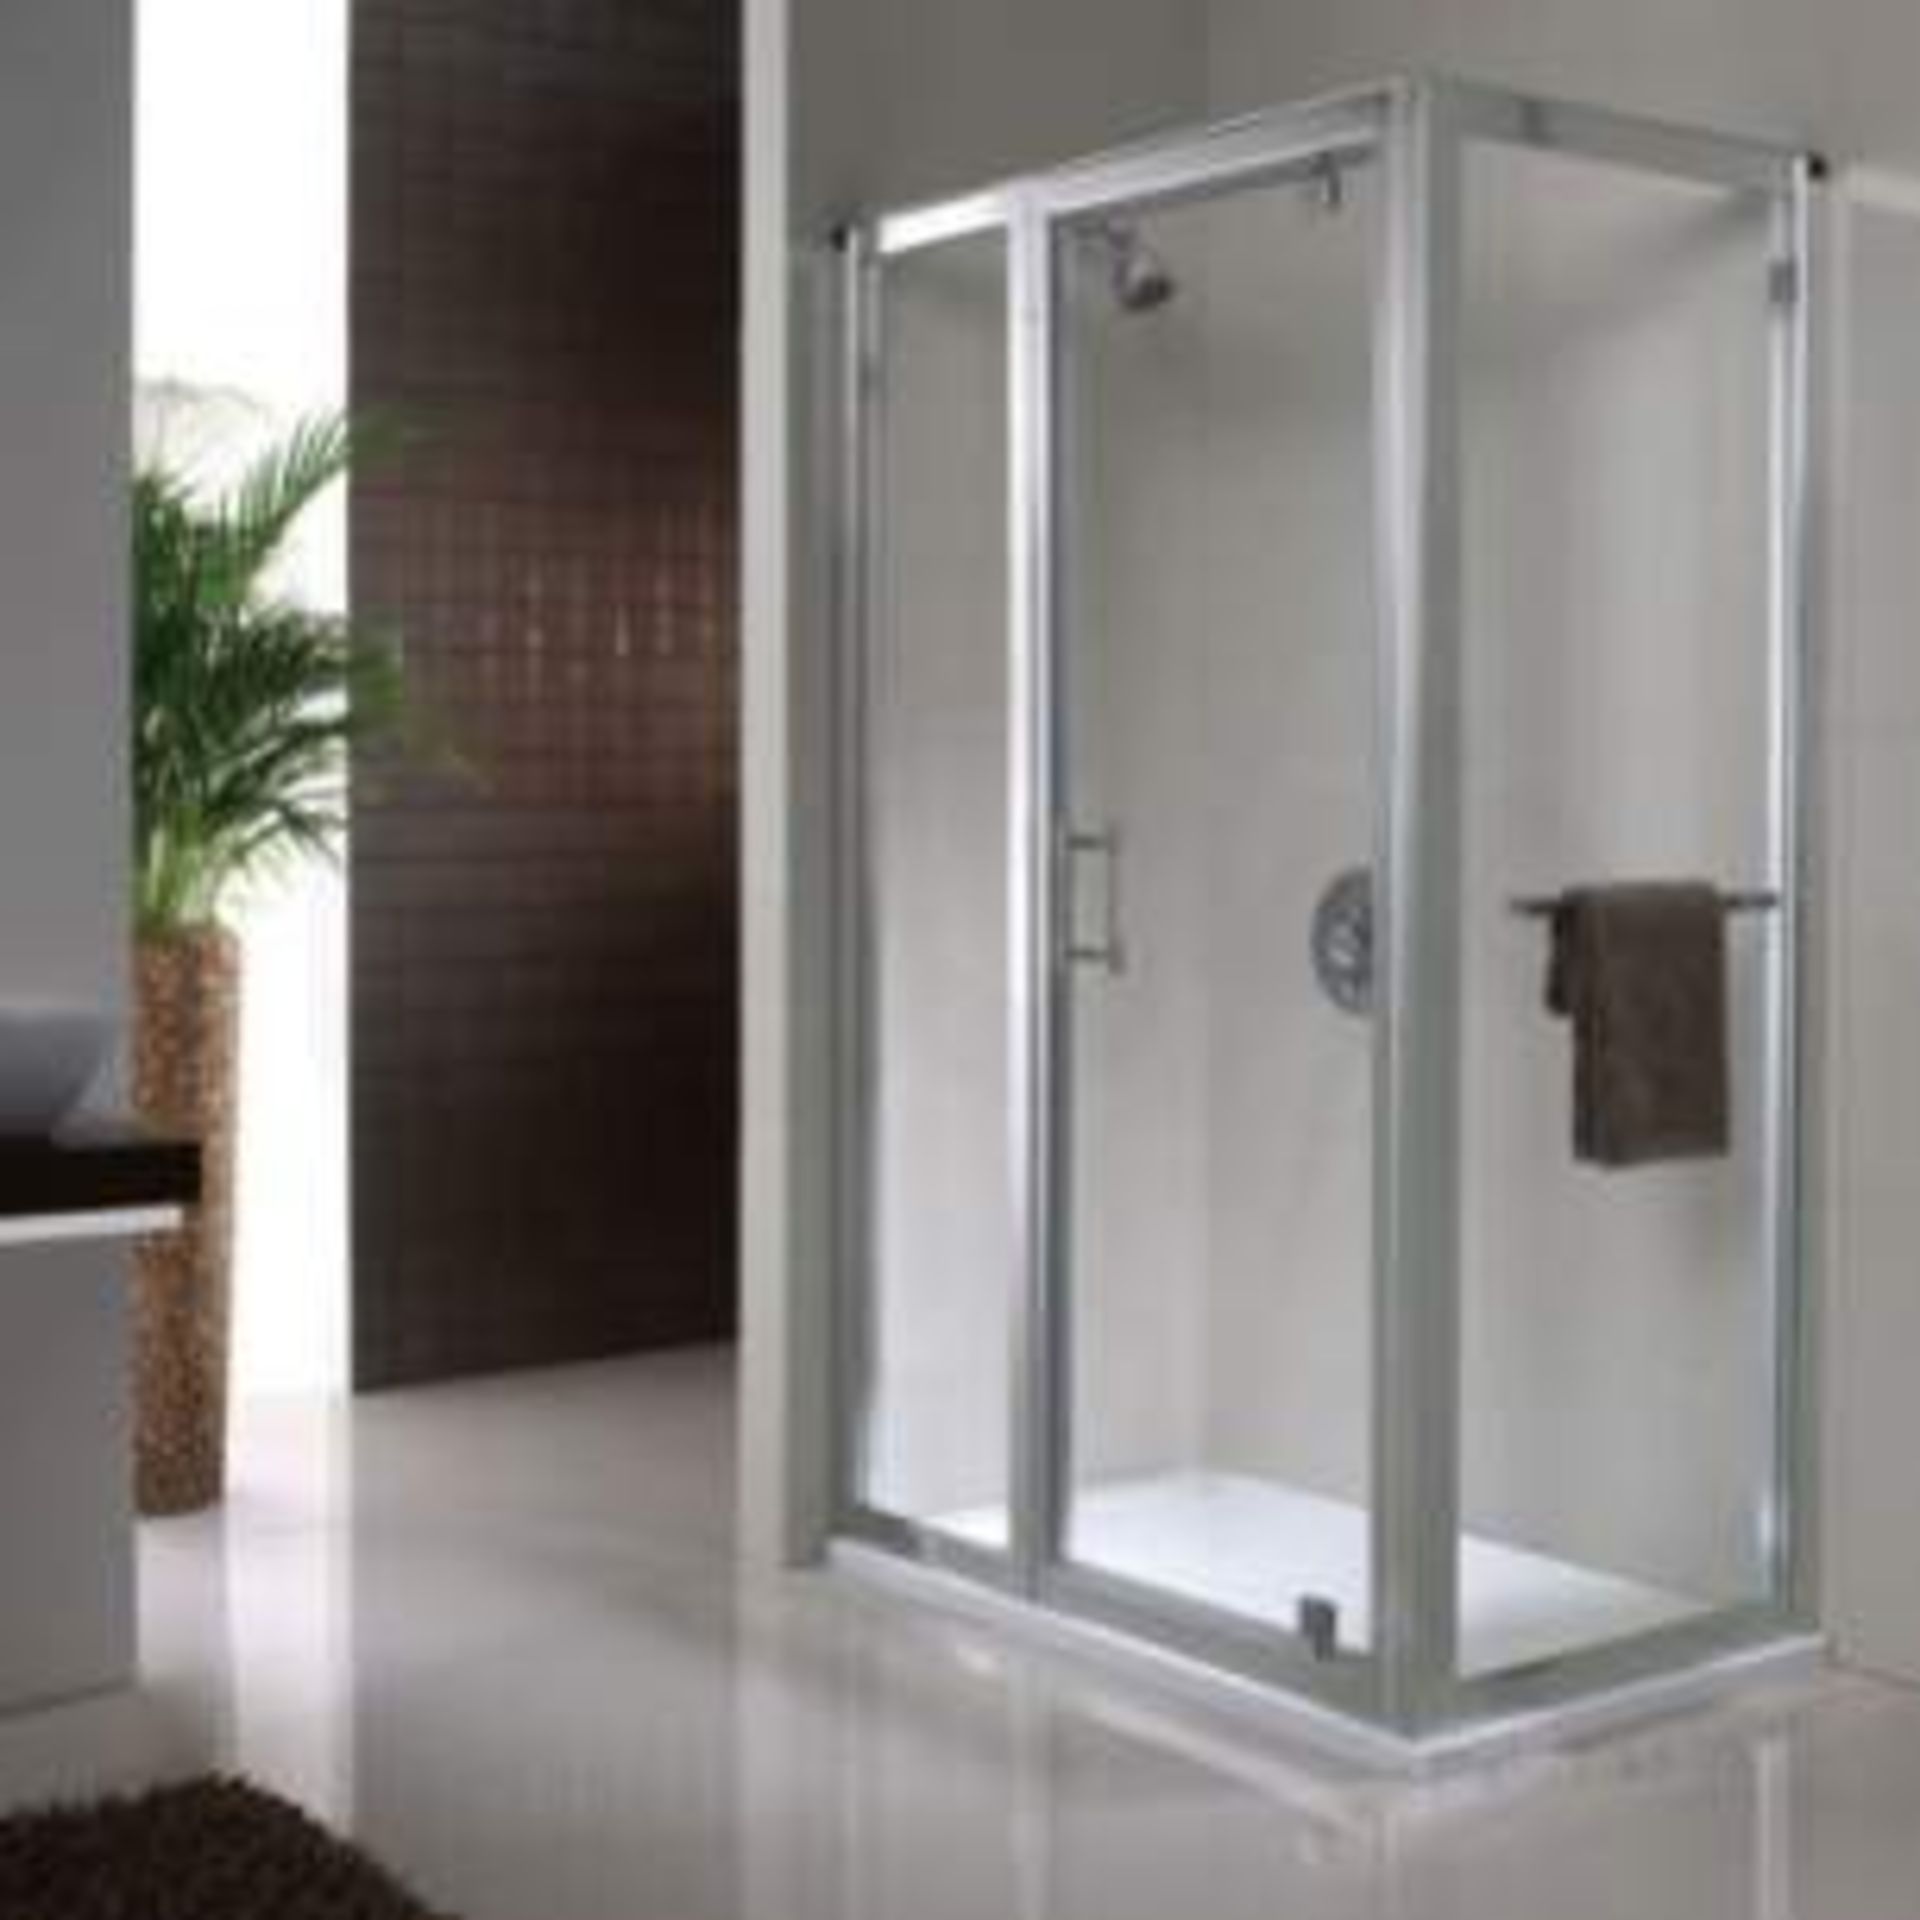 Twyfords In Line Panel 800mm G64990cp. In Line Panel 800mm,Consists Of Fully Framed Glass Pane...